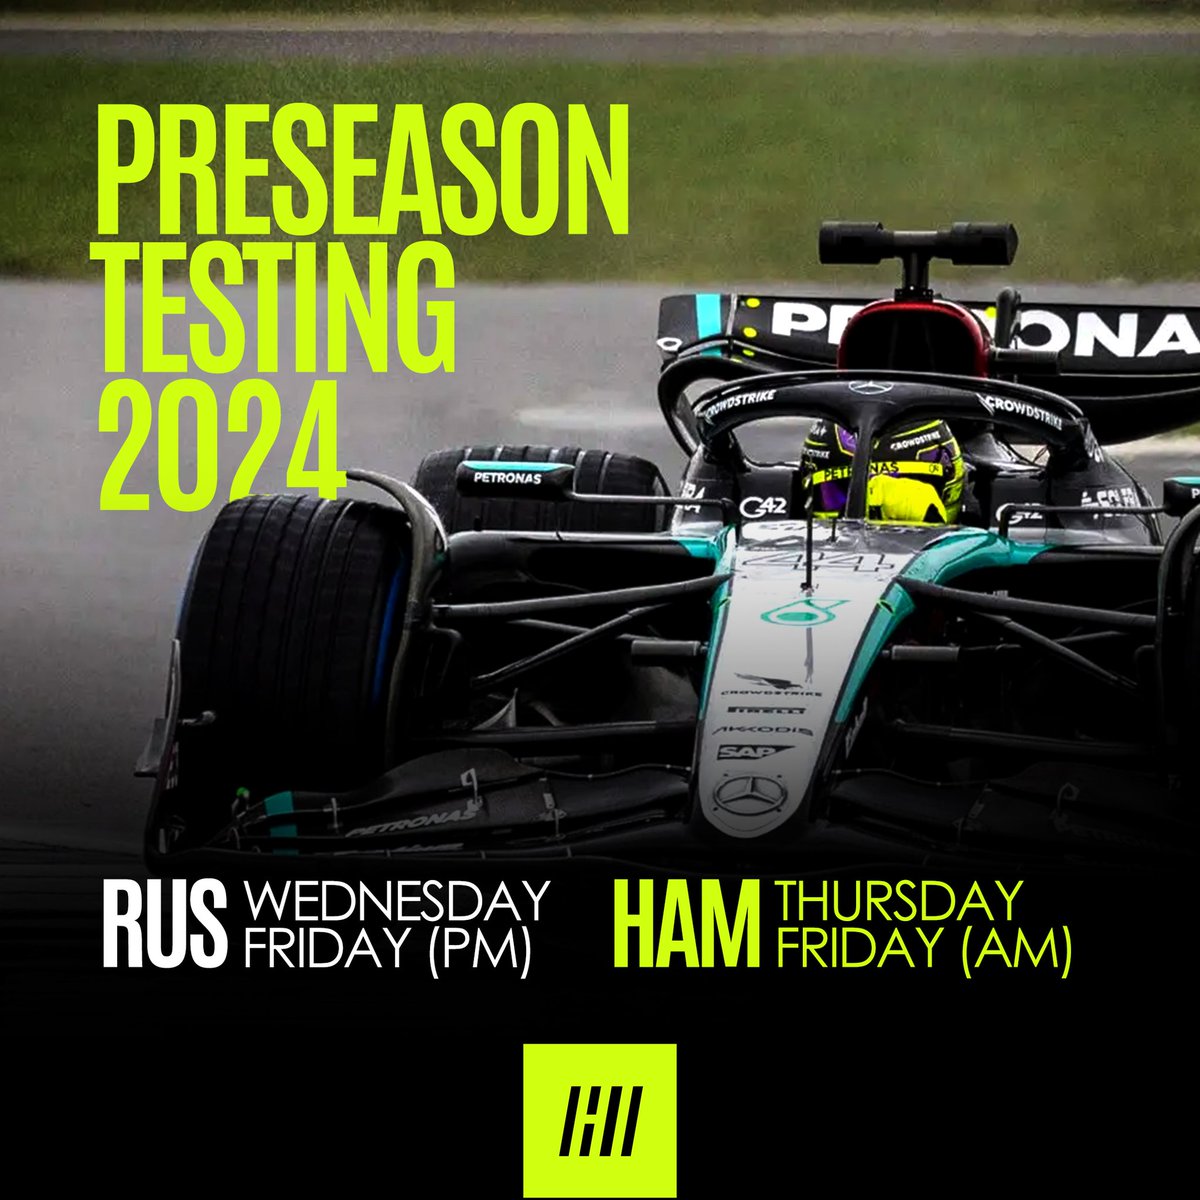 A quick reminder on our 2024 preseason testing schedule : - Thursday, 22nd - Friday, 23rd (AM) #F1Testing